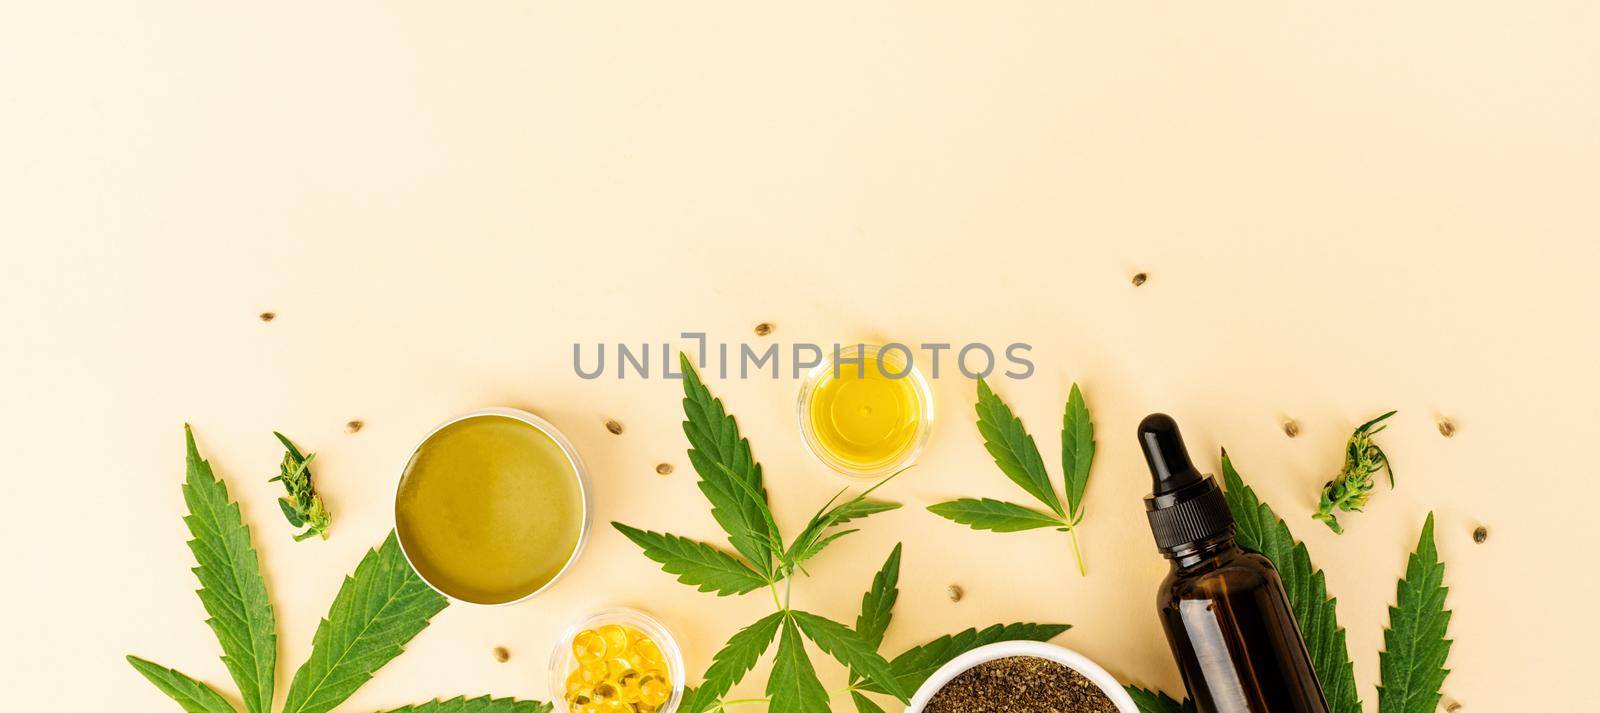 Alternative medicine, natural cosmetics. cbd oil and cannabis leaves cosmetics top view on orange background, flat lay